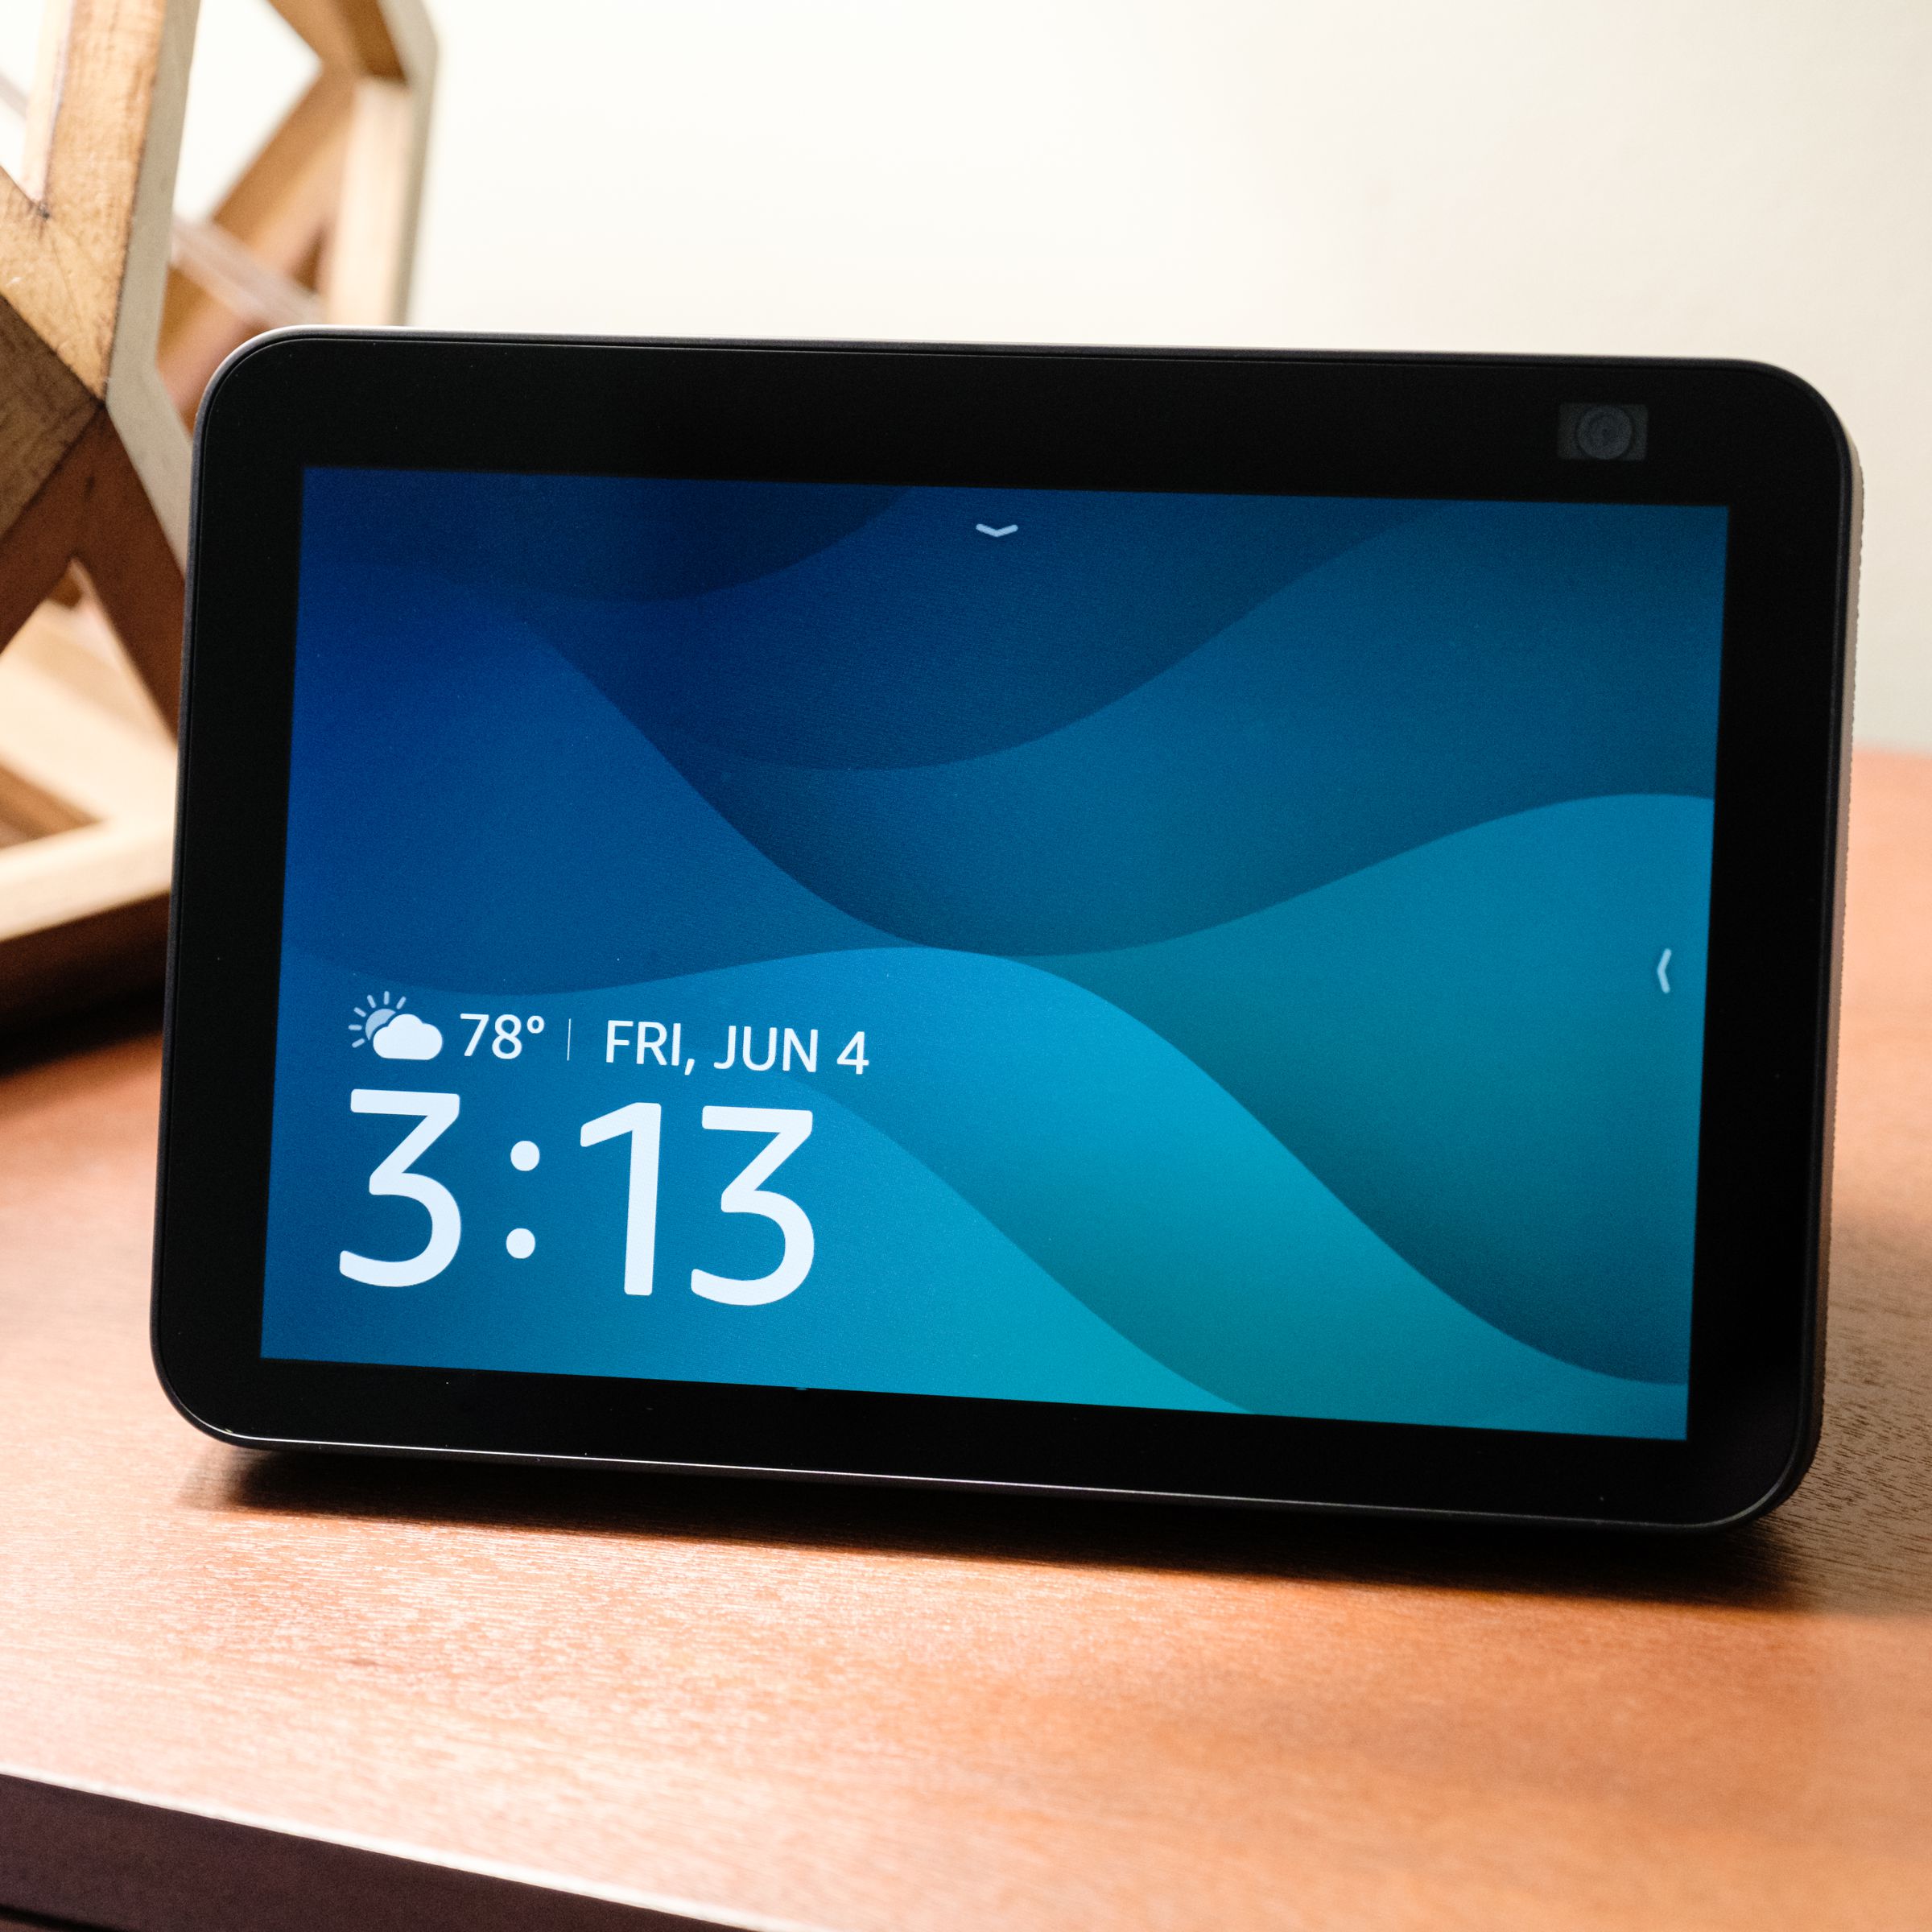 The second-gen Echo Show 8 with its main screen on display and resting on a table.